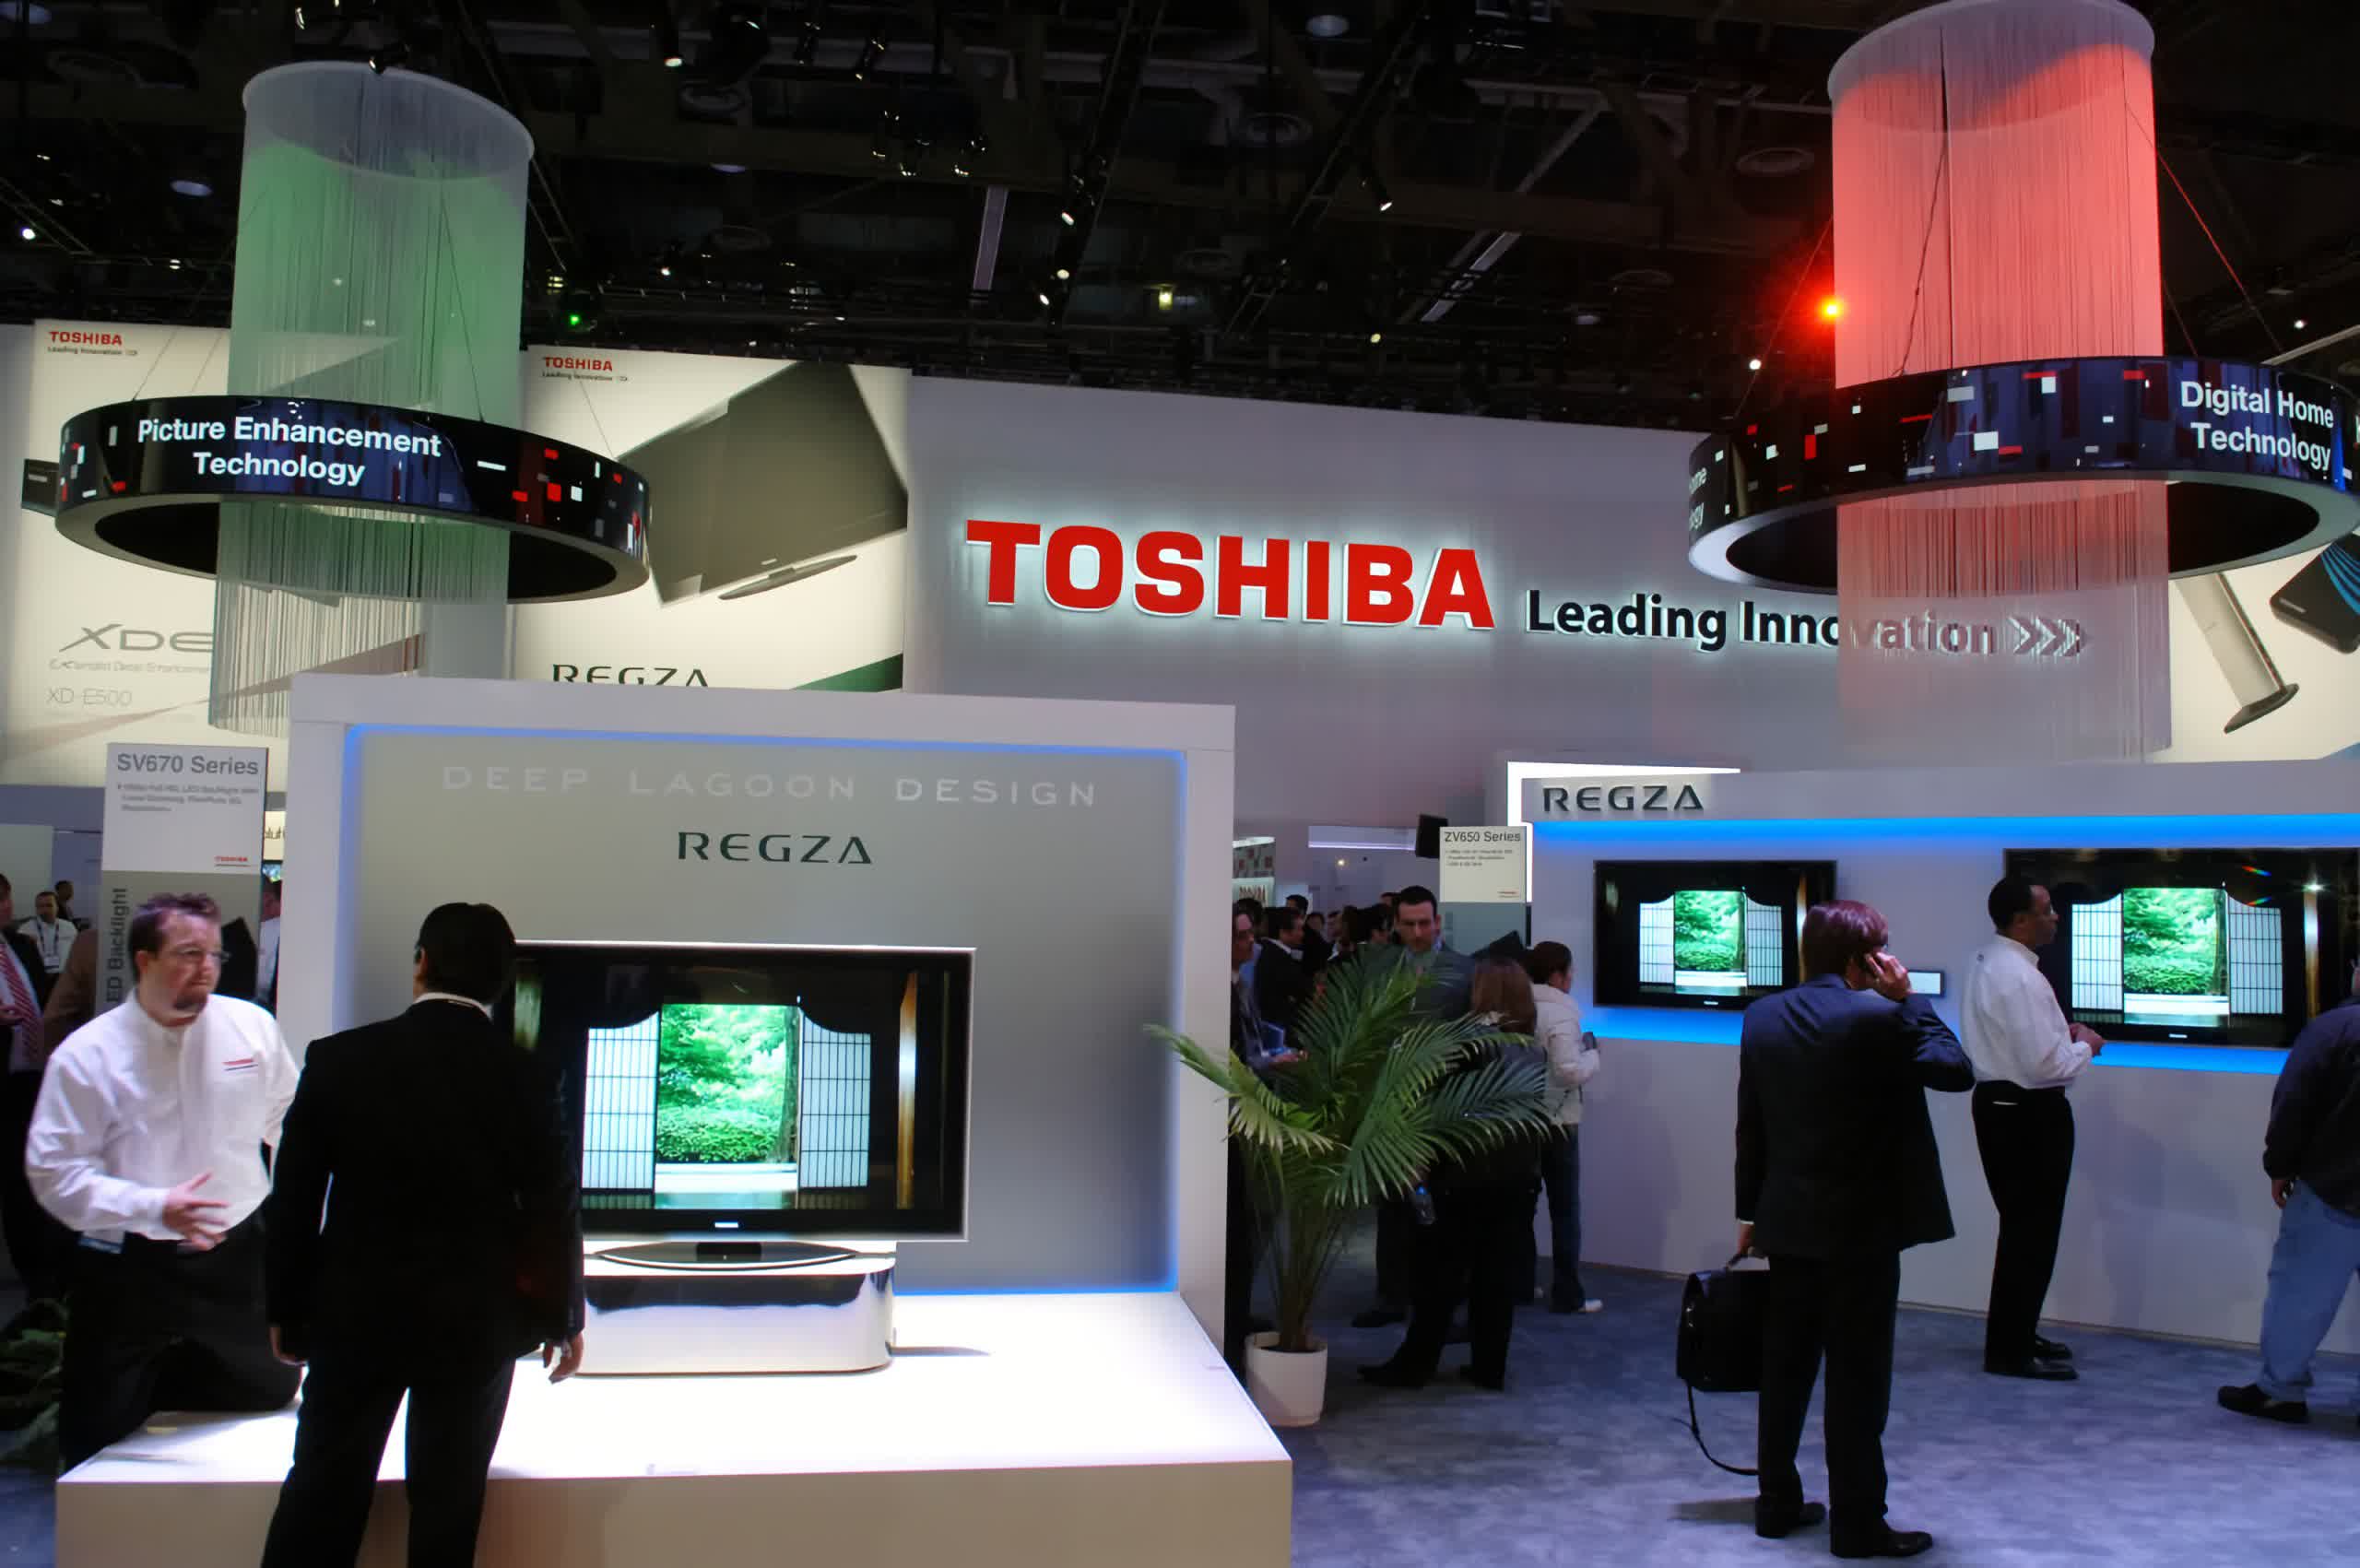 Toshiba plans to proceed with 2 trillion yen buyout offer from Japanese conglomerate